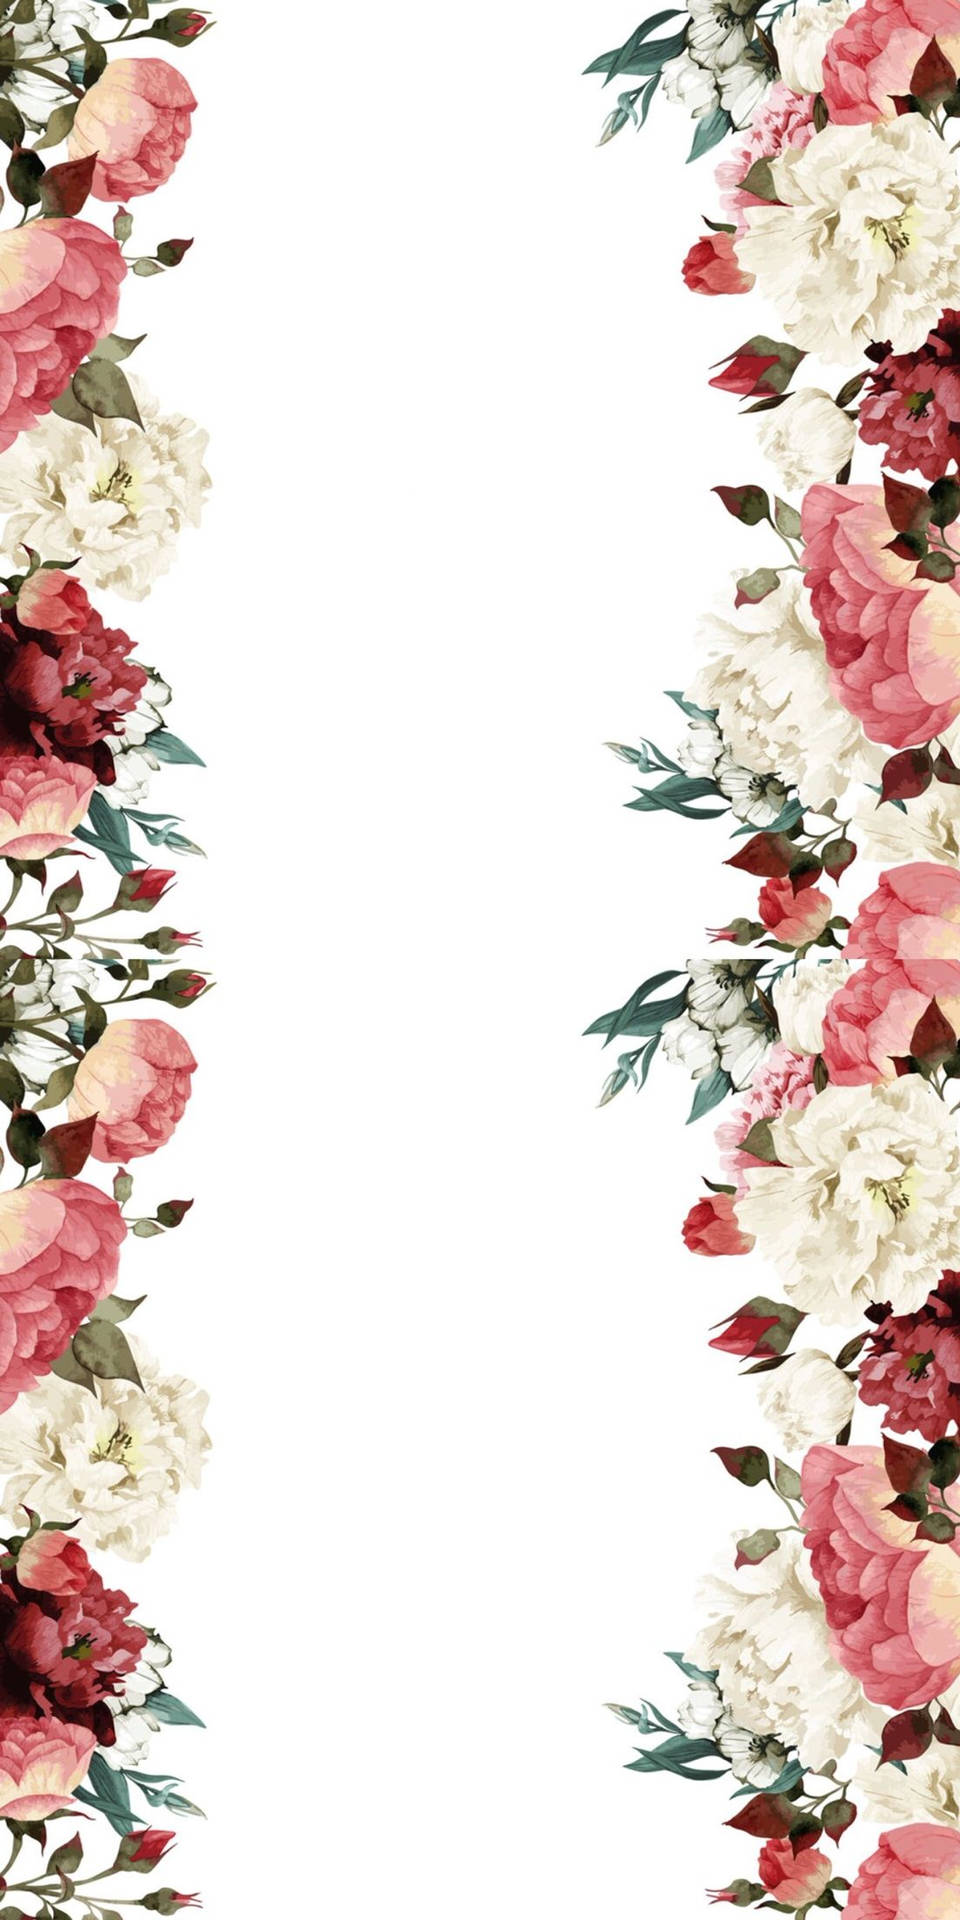 Romantic Flowers Border Background Romantic S Border Background Image  And Wallpaper for Free Download  Flower border Floral wreaths  illustration Flower background wallpaper